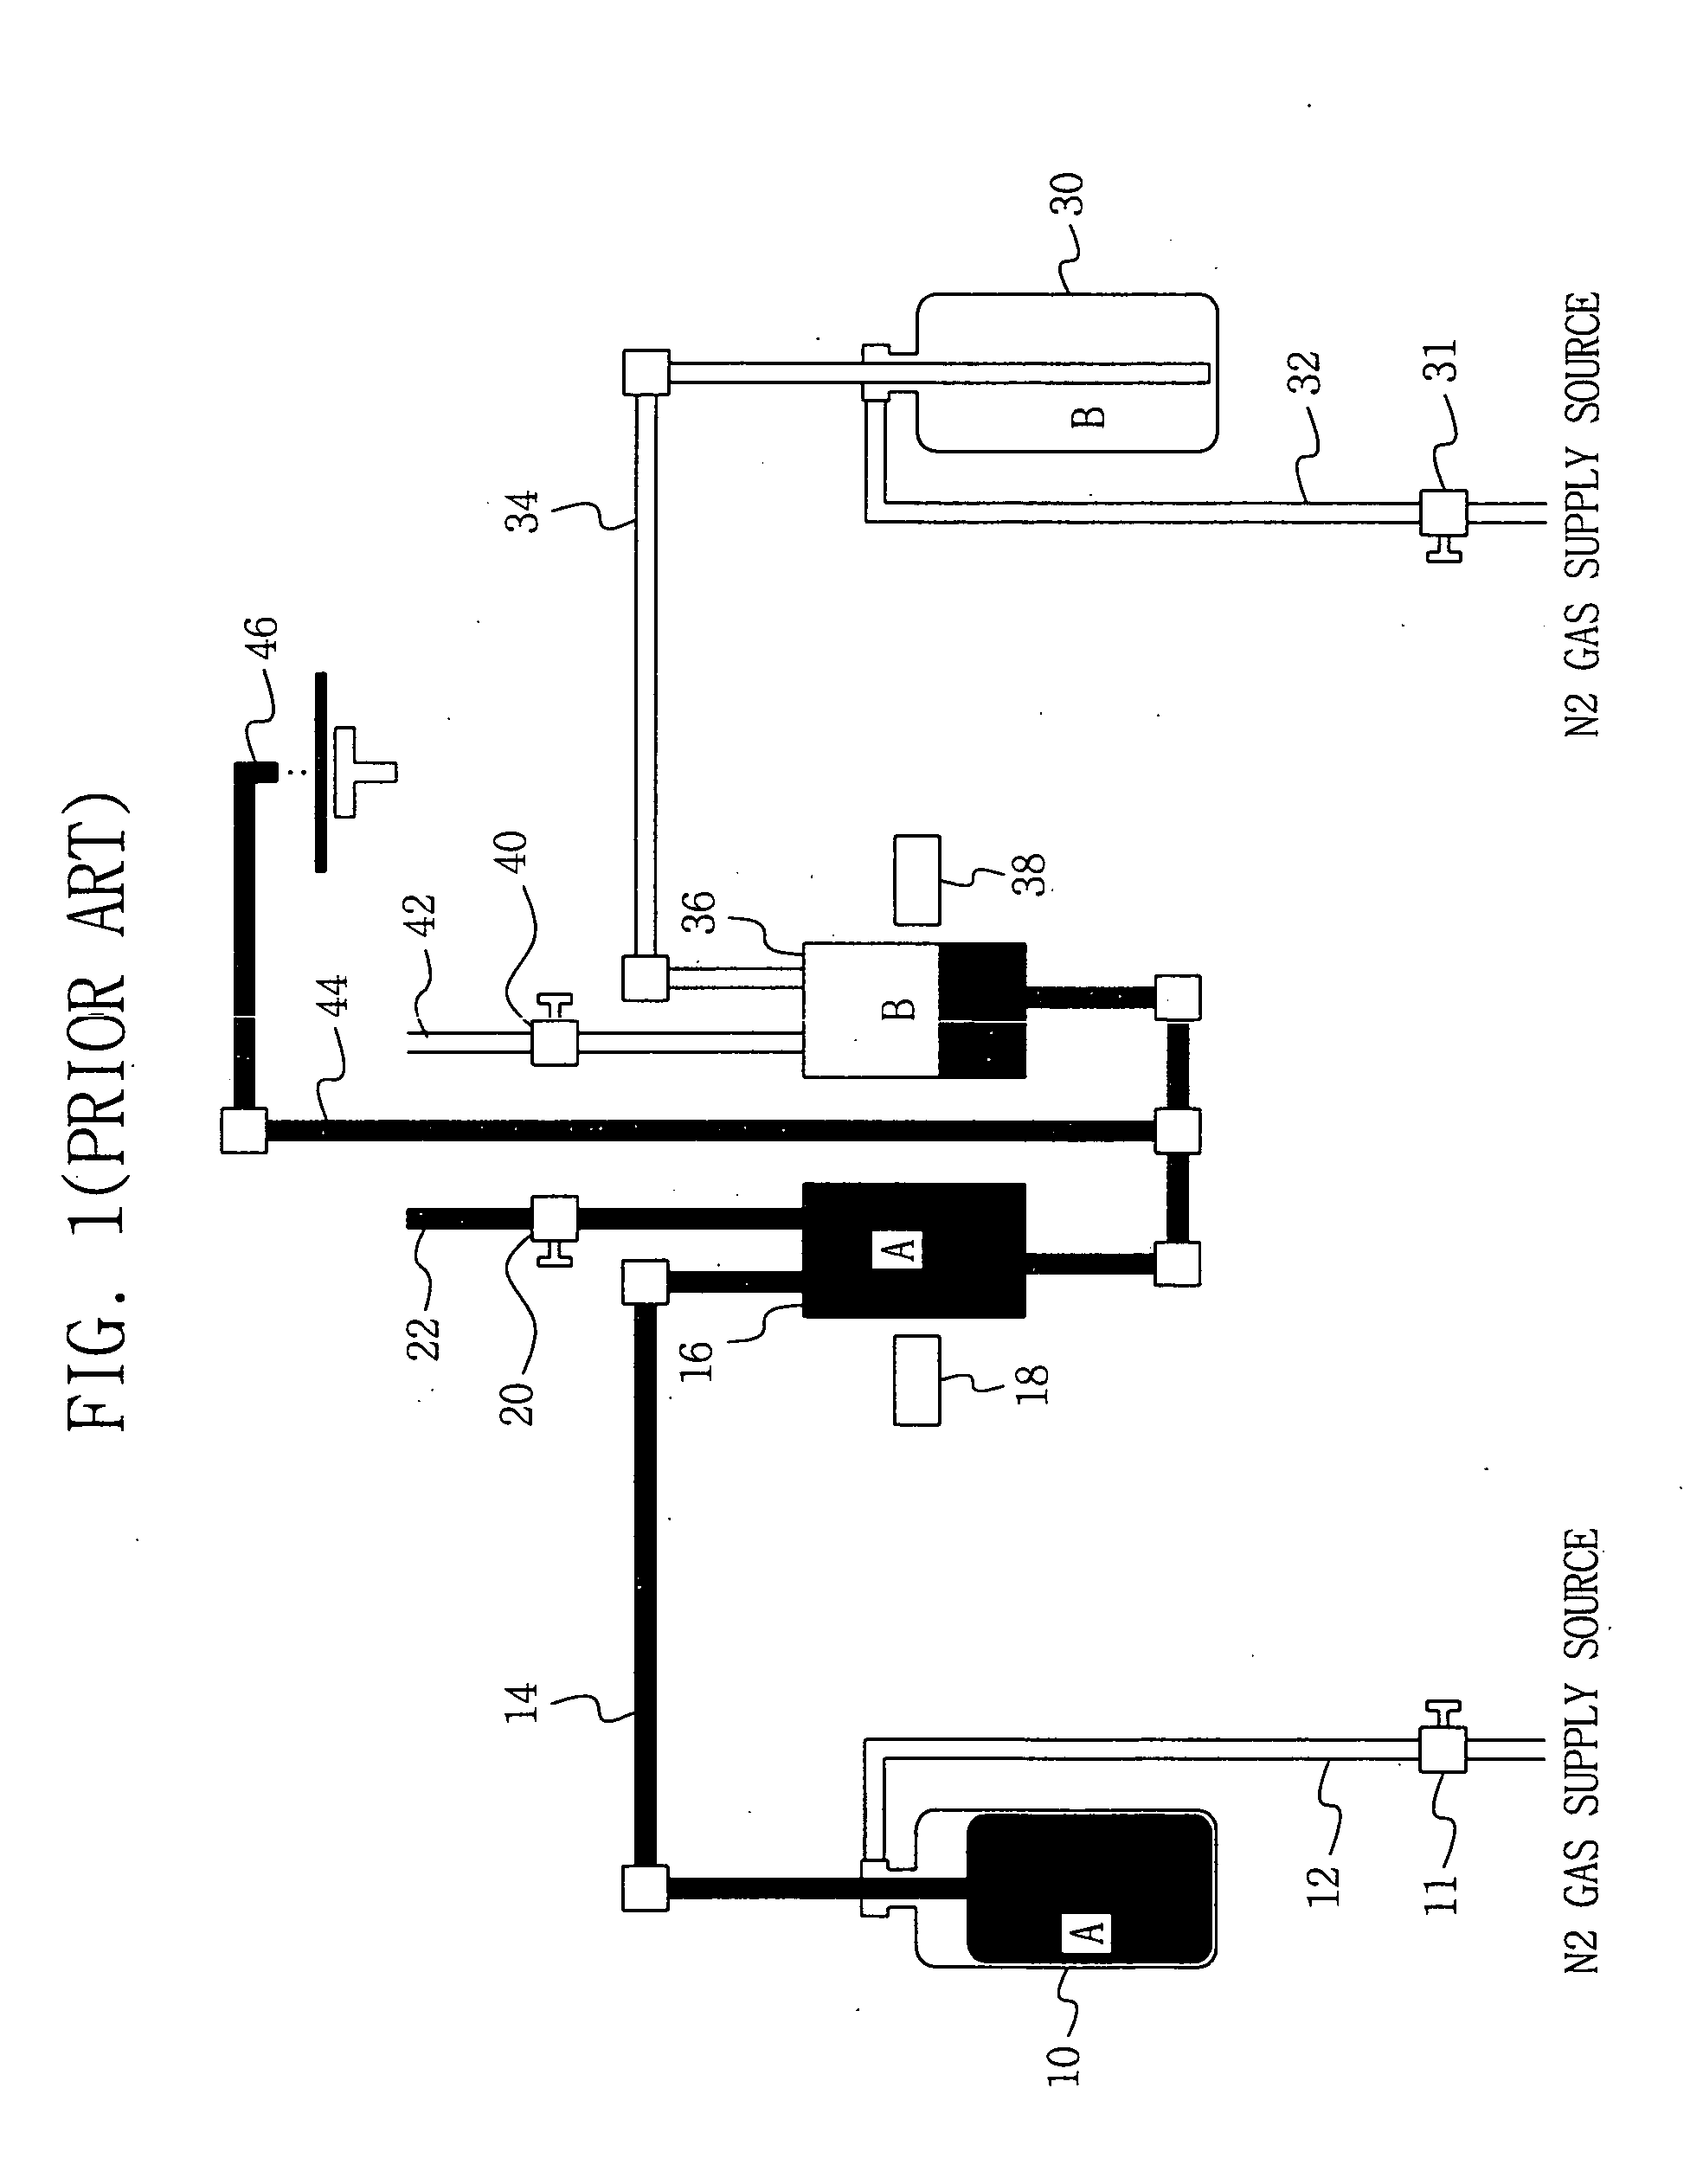 Photoresist supply apparatus and method of controlling the operation thereof